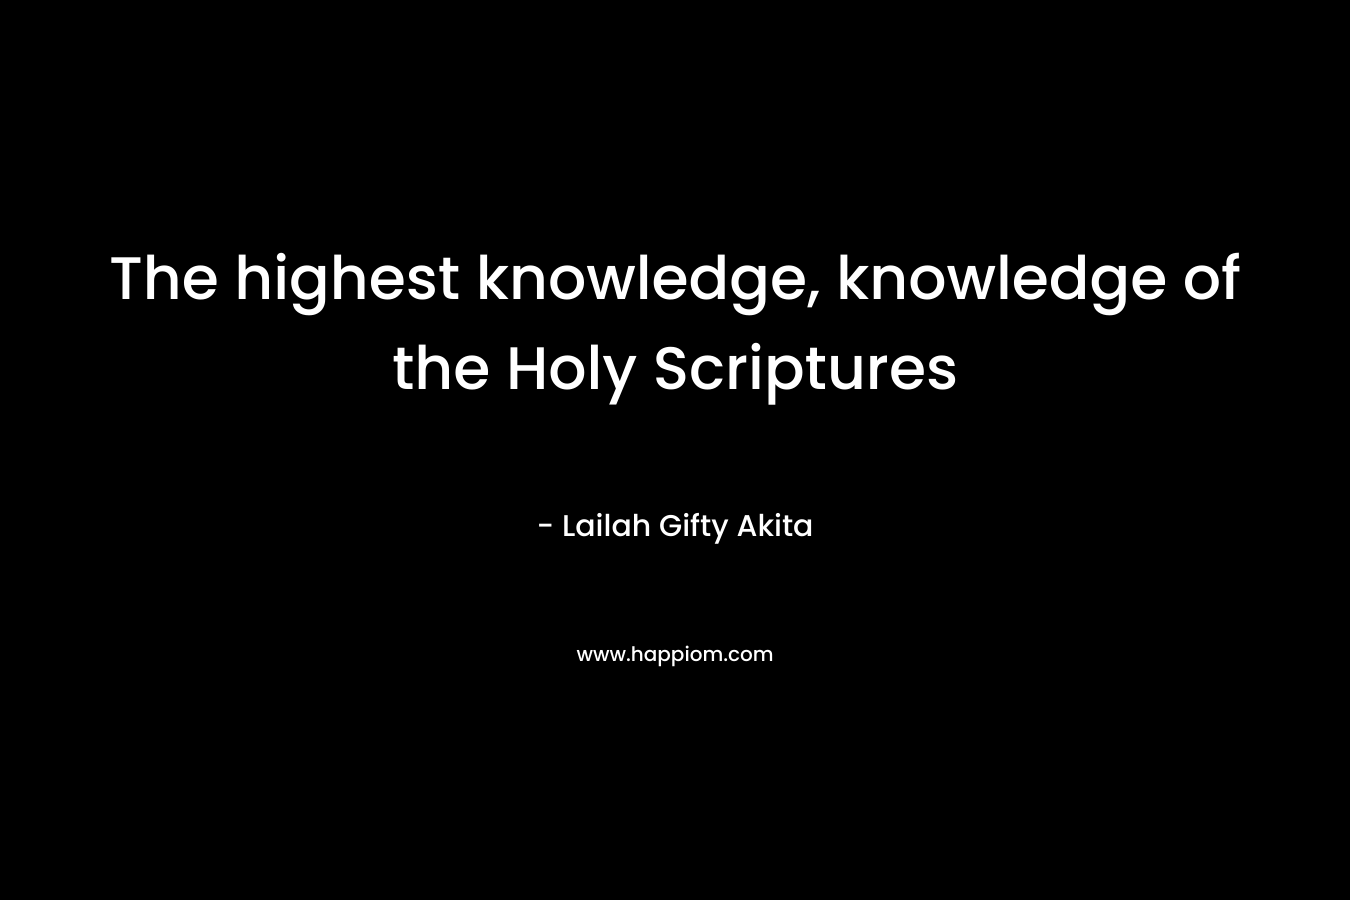 The highest knowledge, knowledge of the Holy Scriptures